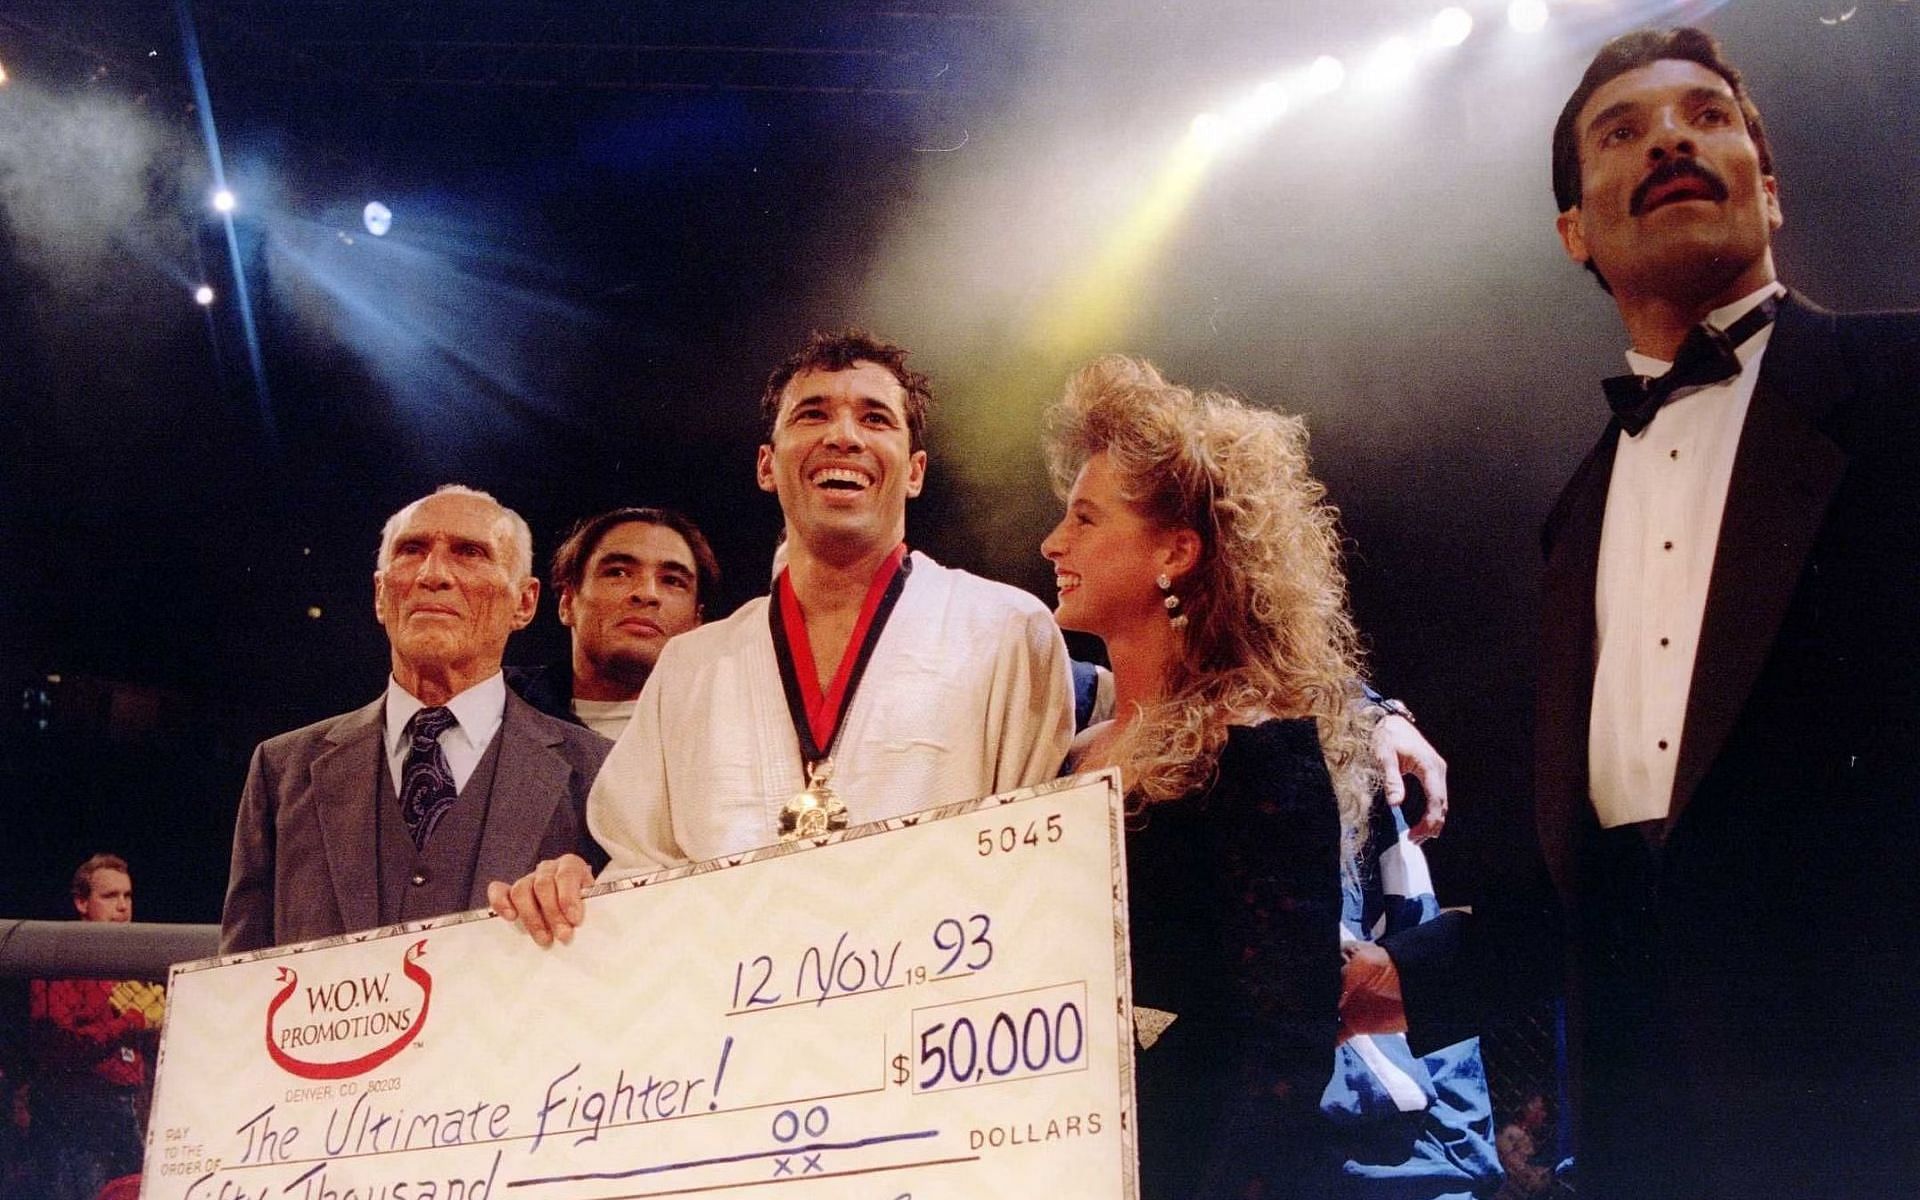 Royce Gracie introduced the art of submission grappling to the world